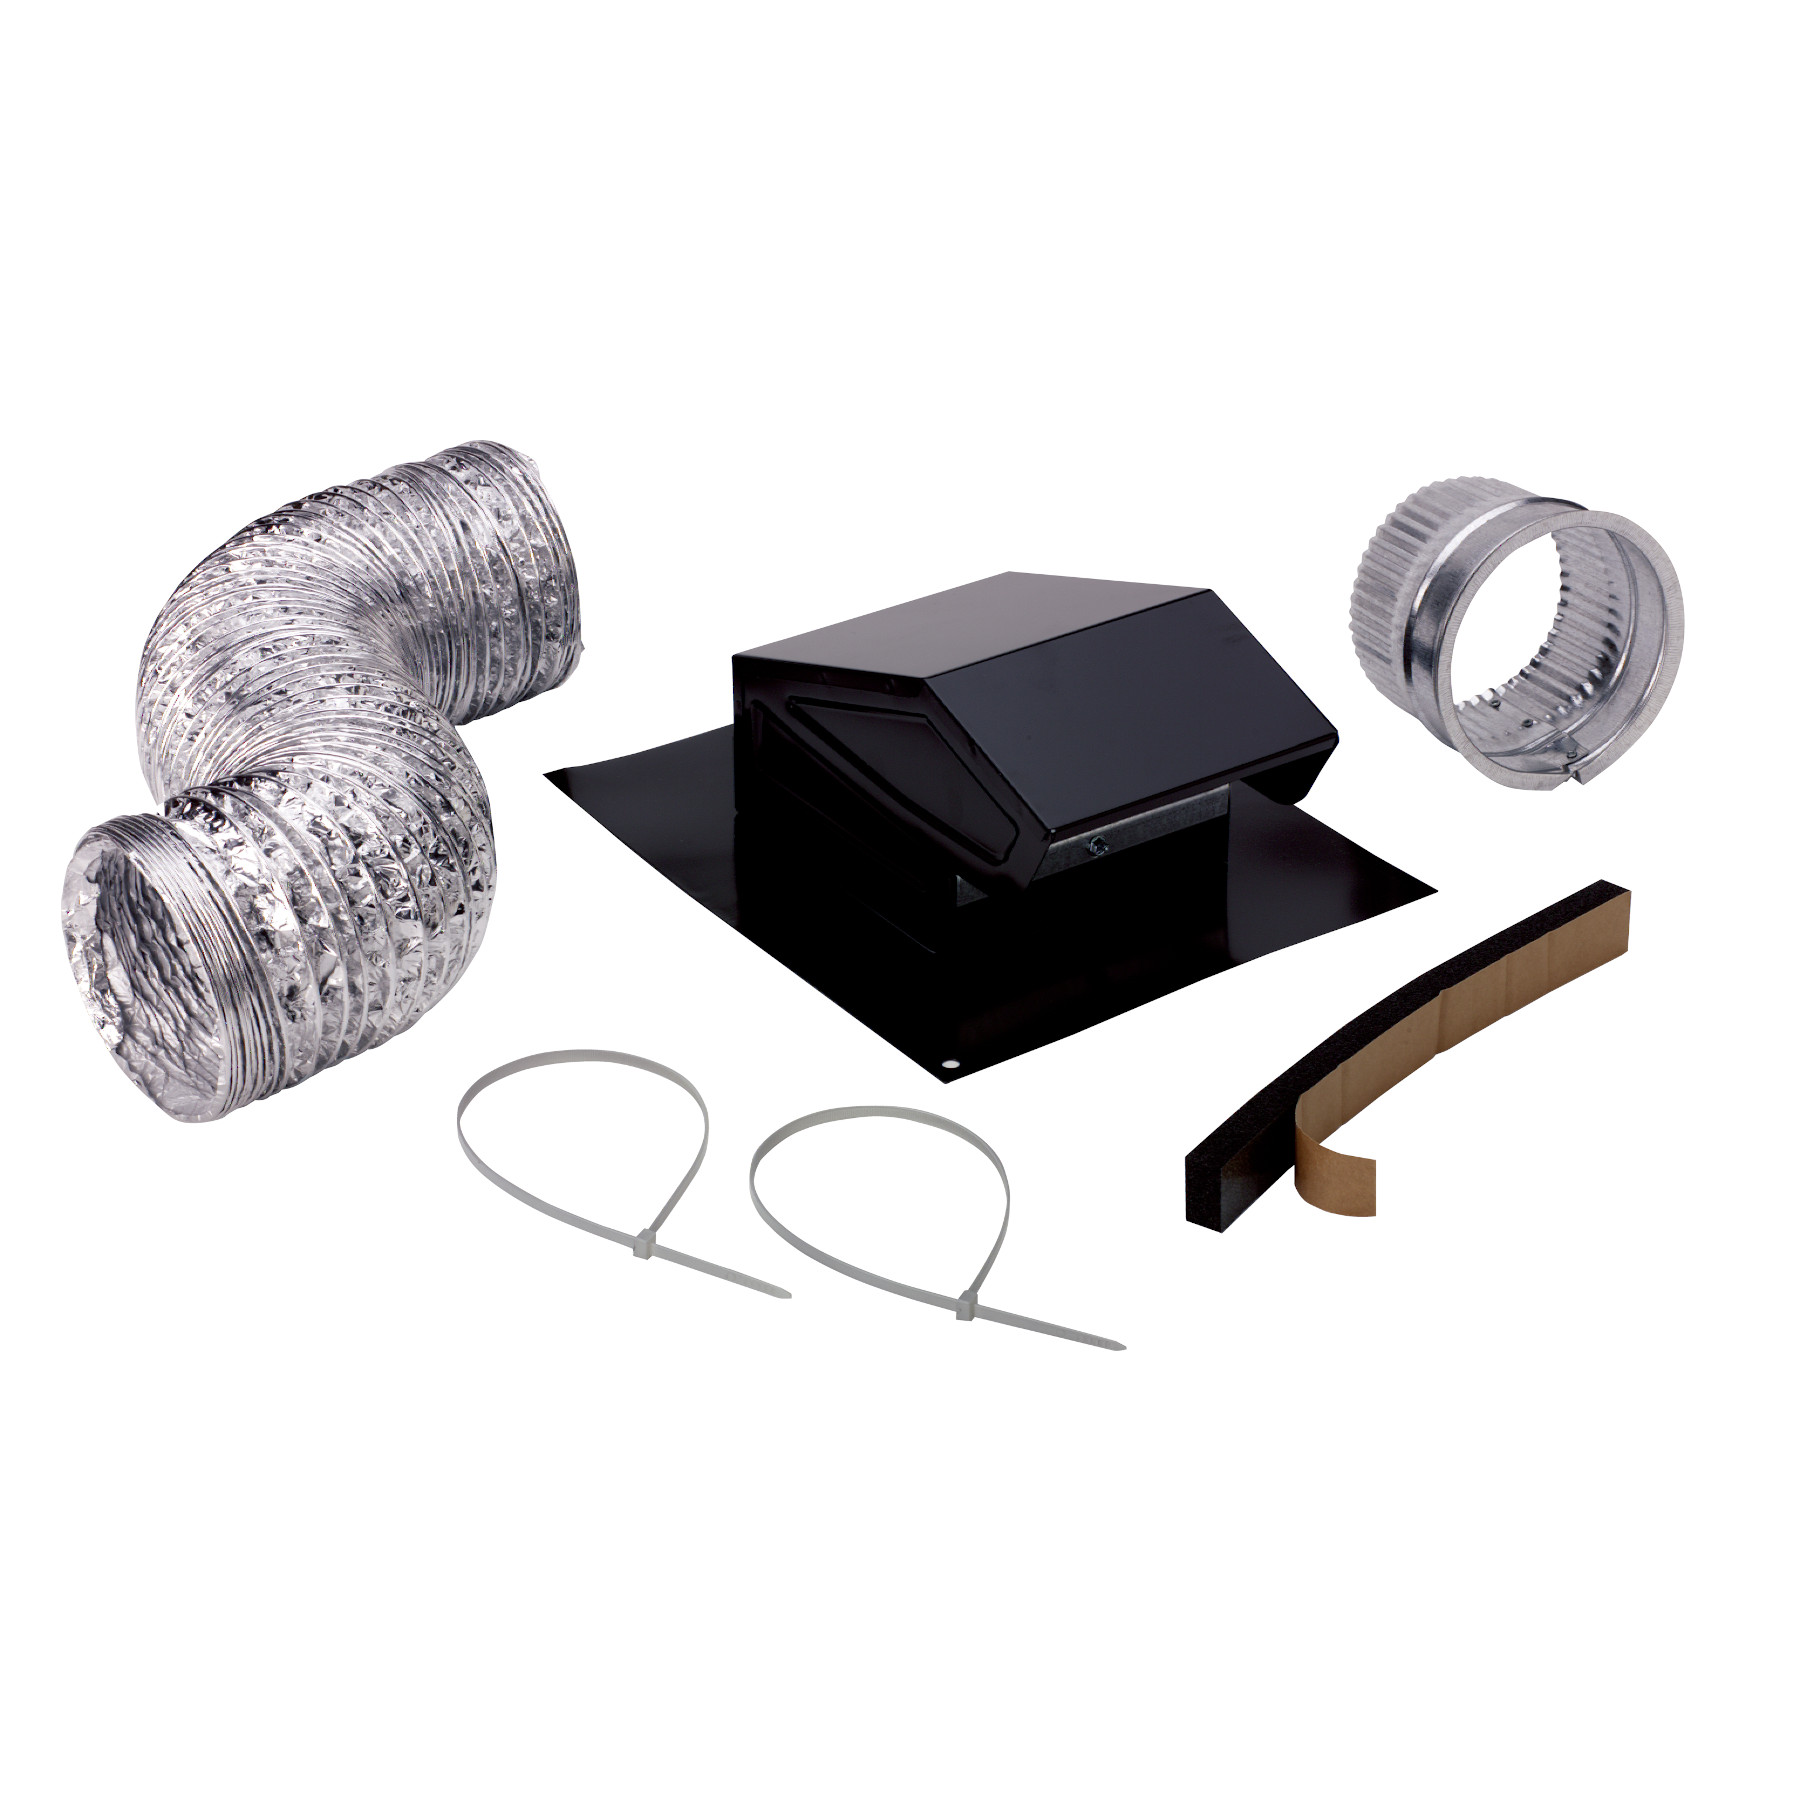 BRN RVK1A ROOF VENT KIT, 8' OF 4"FLEXIBLE ALUM DUCT, 636 ROOF CAP, 4" TO 3" REDUCER, 4" DIAMETER CONNECTOR, (2) 4" DIA CLAMPS